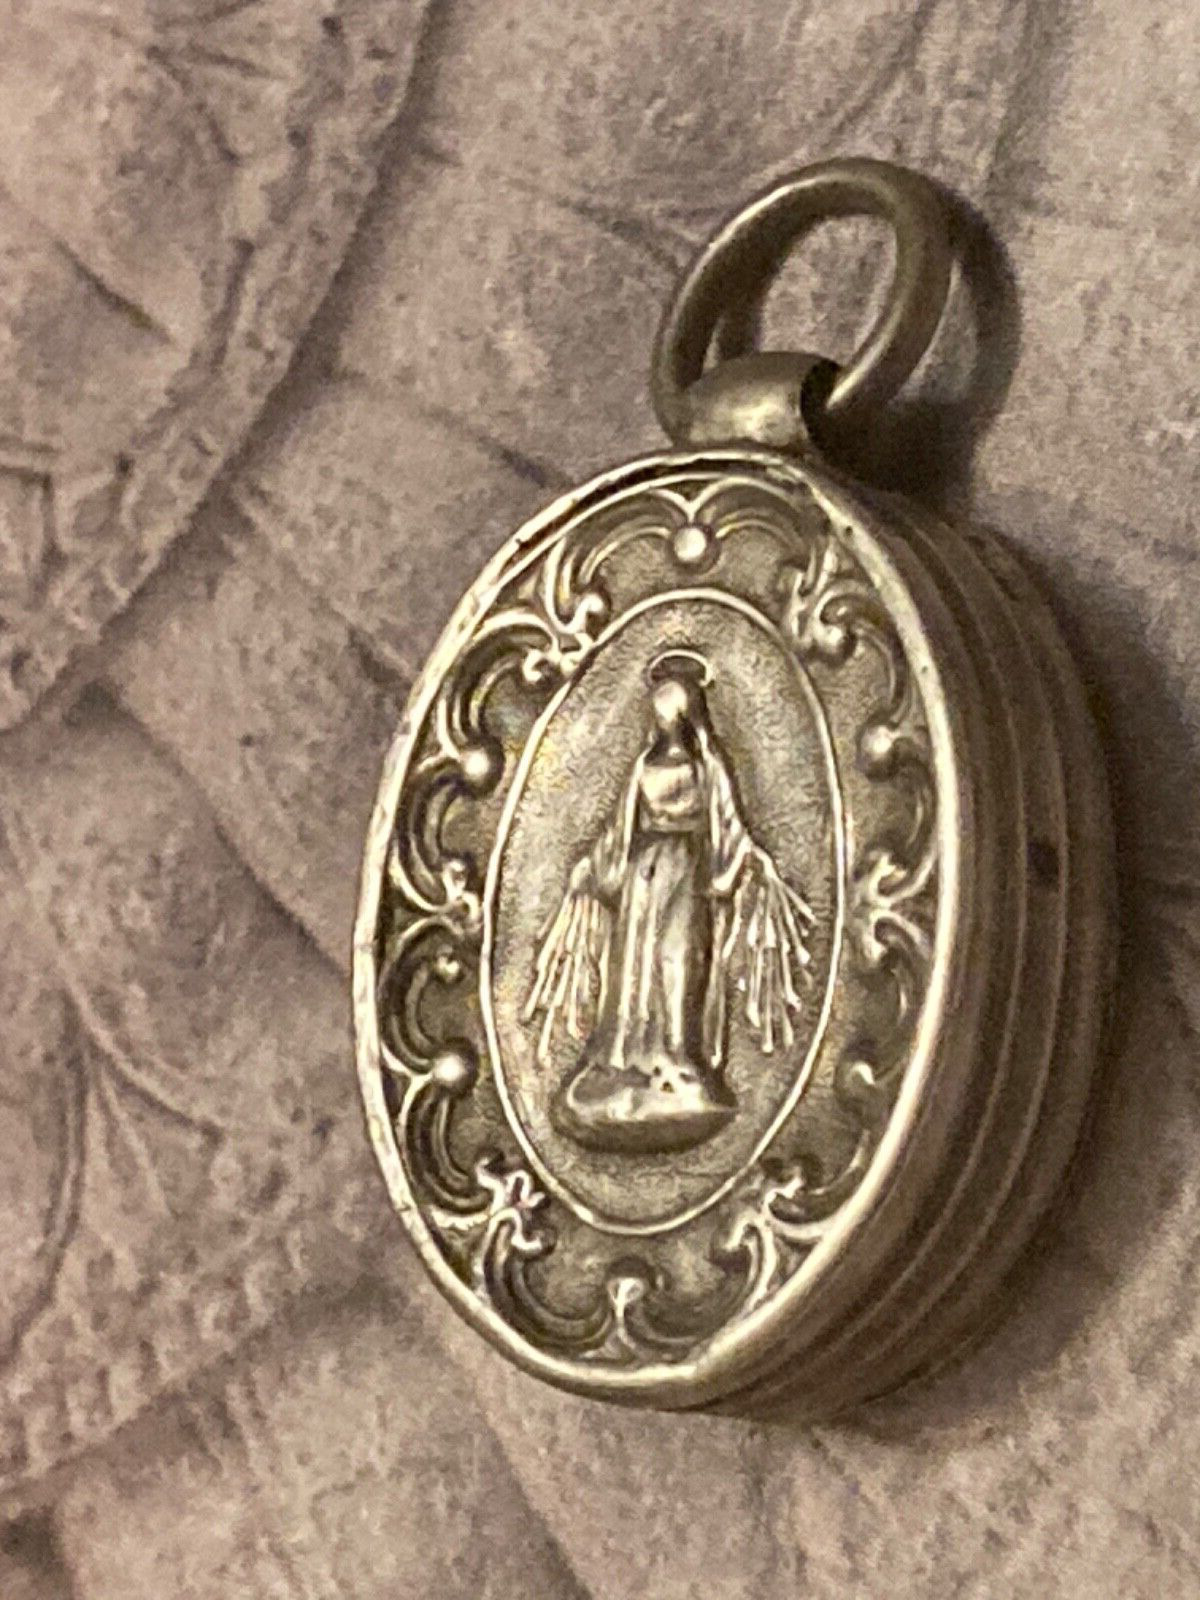 1800’s ANTIQUE STERLING SILVER  RELIQUARY PENDANT LOCKET VIRGIN MARY MIRACULOUS